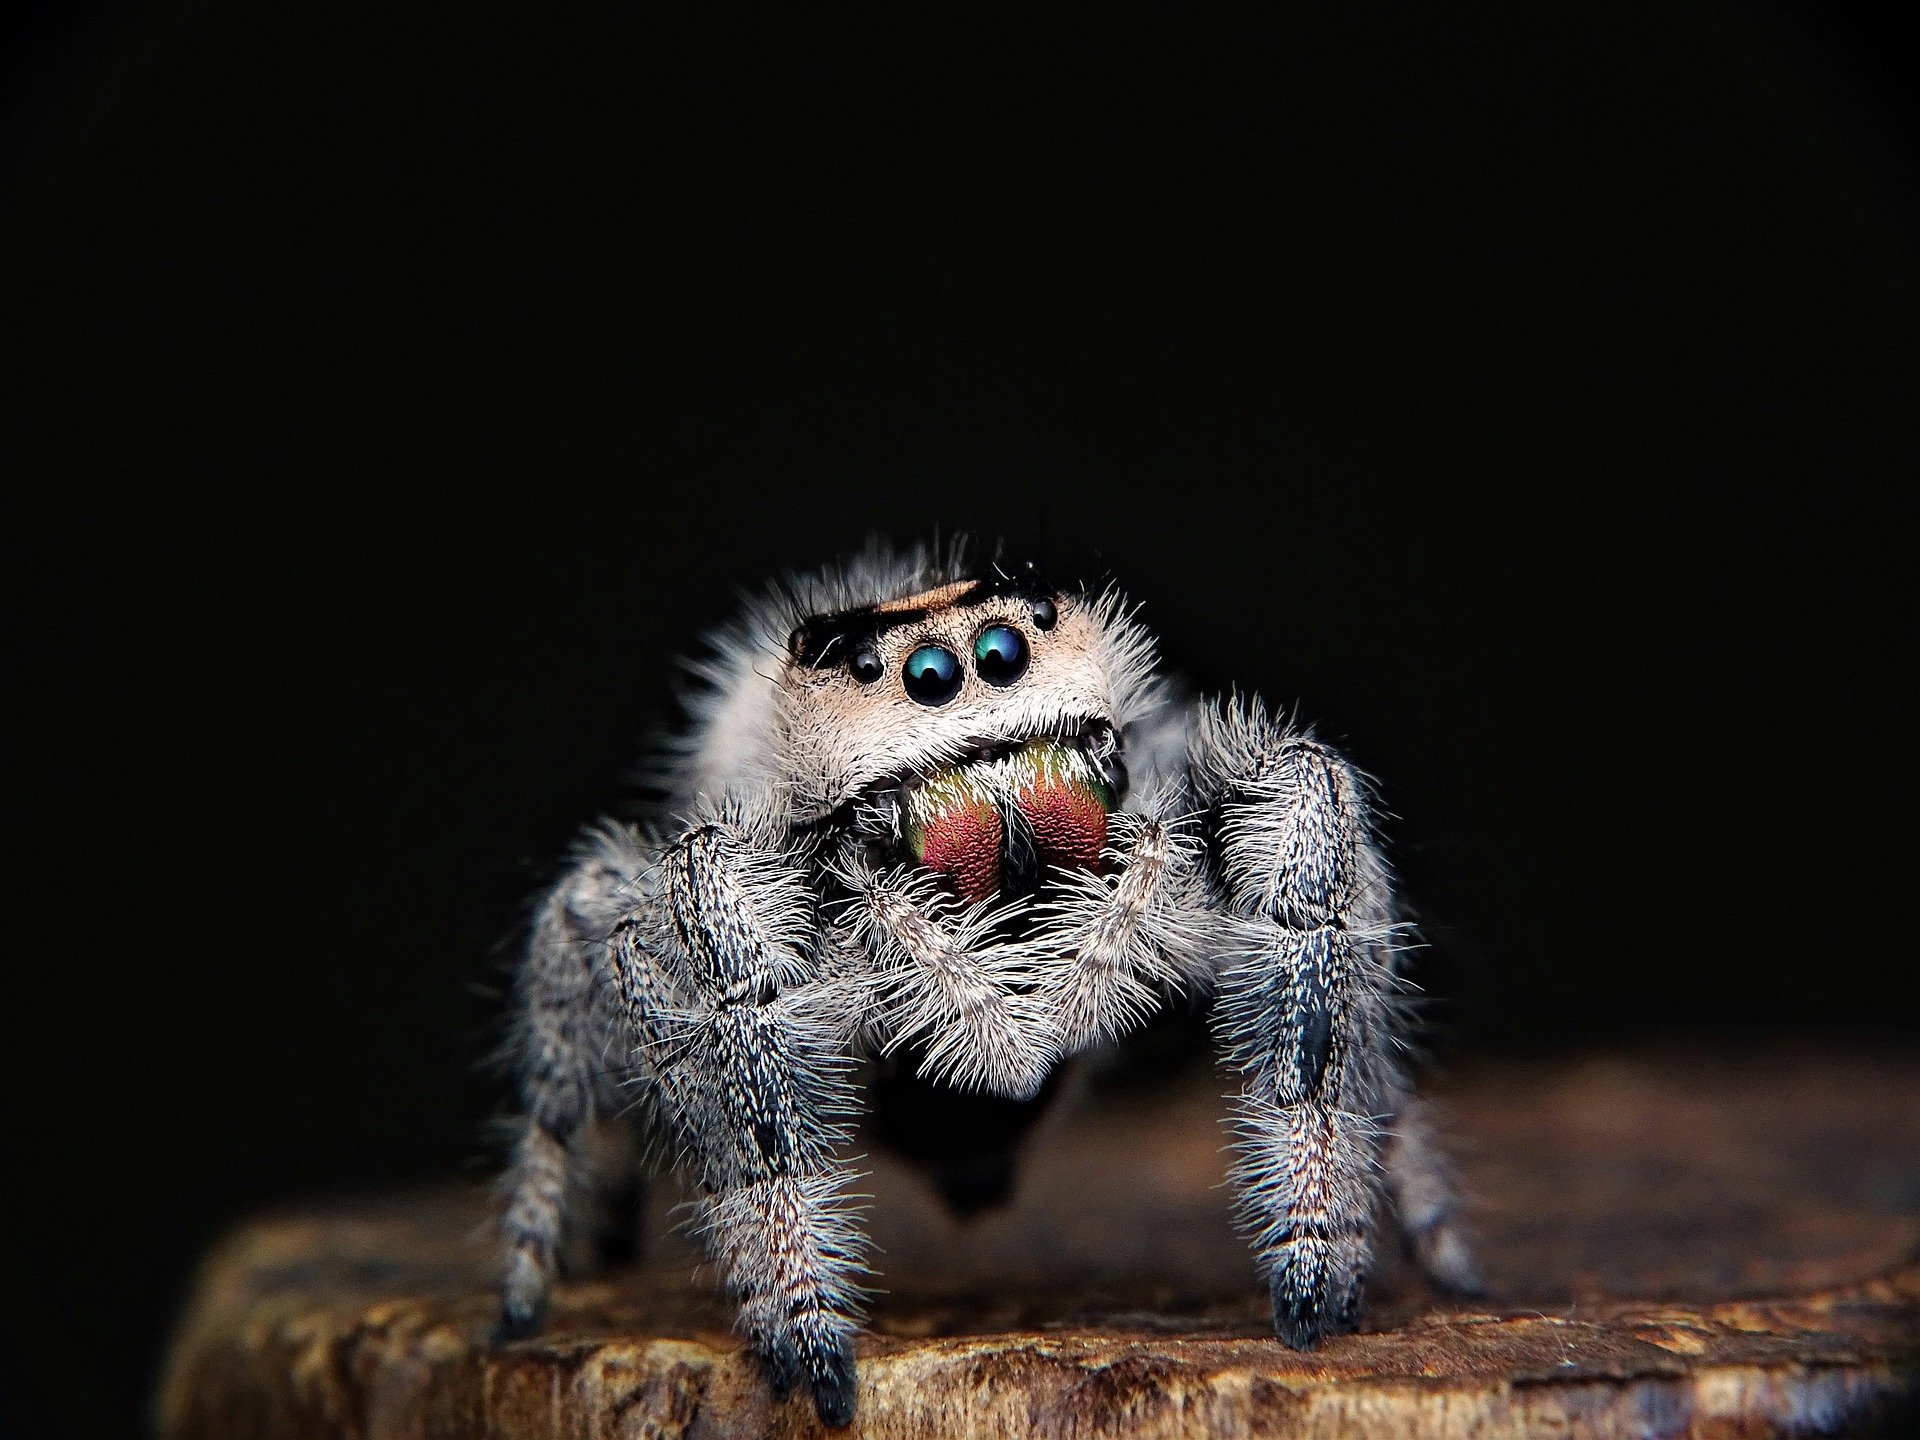 fuzzy white and gray colored spider looking at the camera with head cocked. black background. spider is standing on a piece of wood.